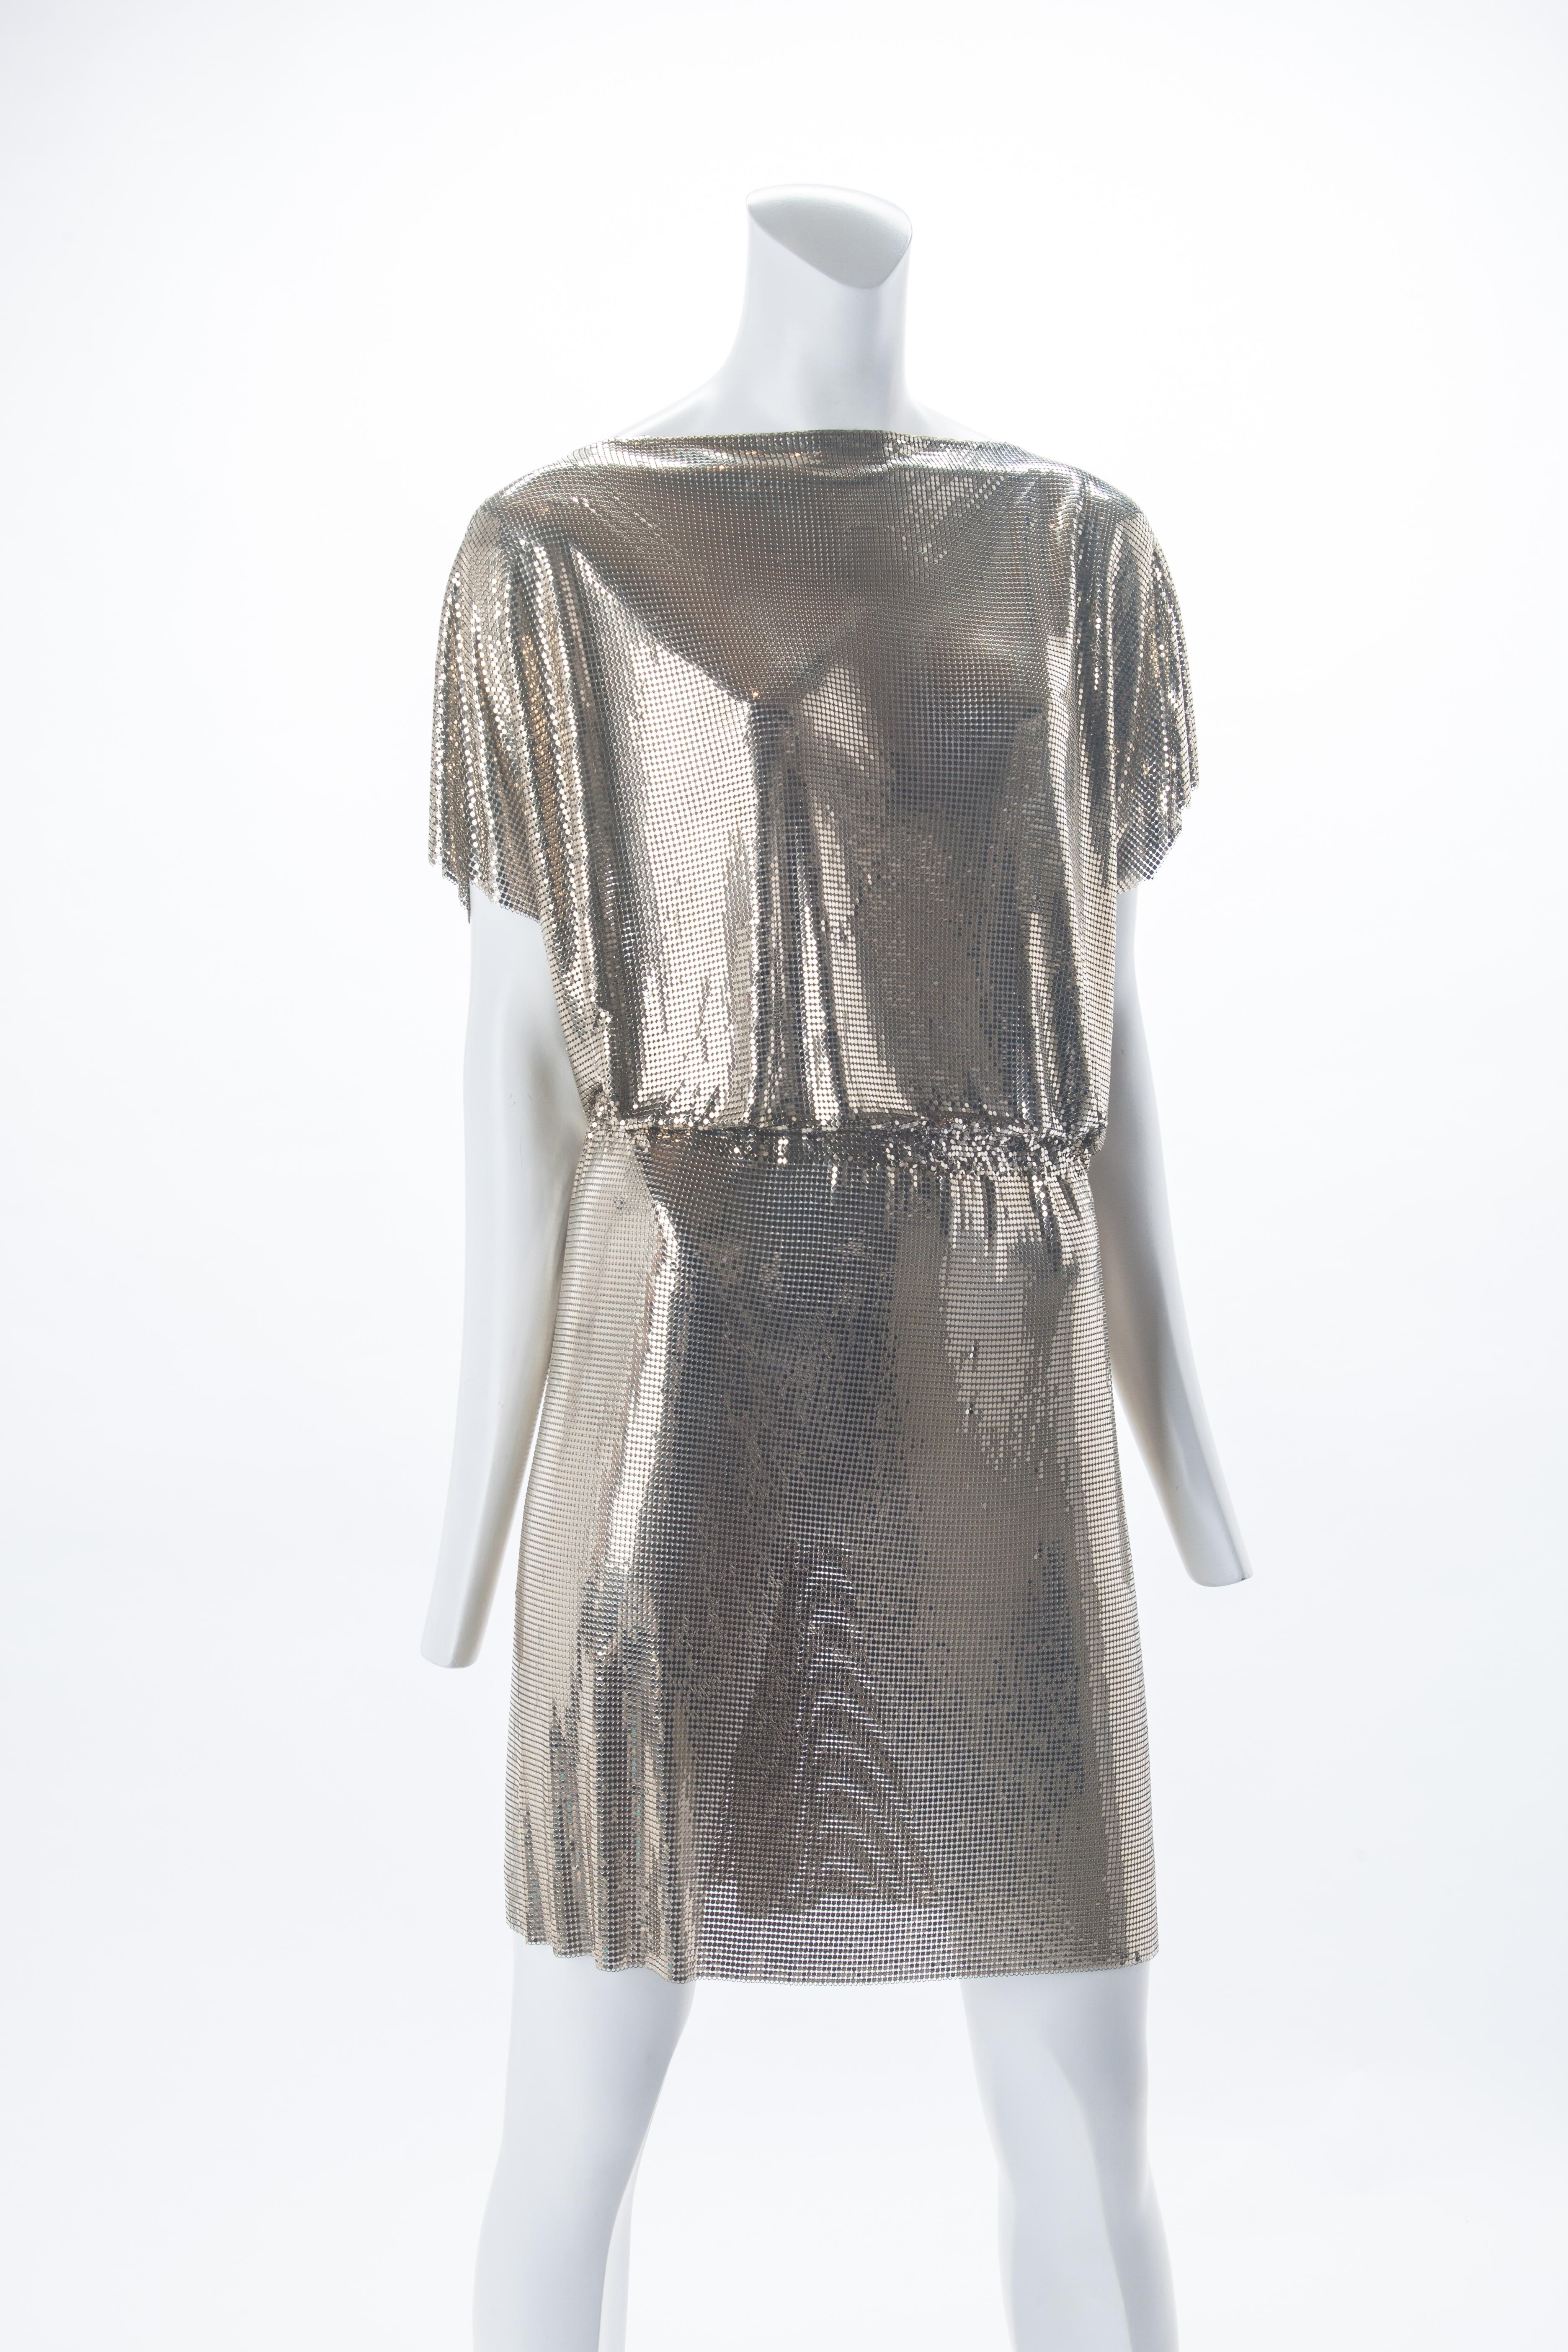 Gianni Versace Gold Oroton Dress, F/W 1994. For Sale at 1stDibs ...